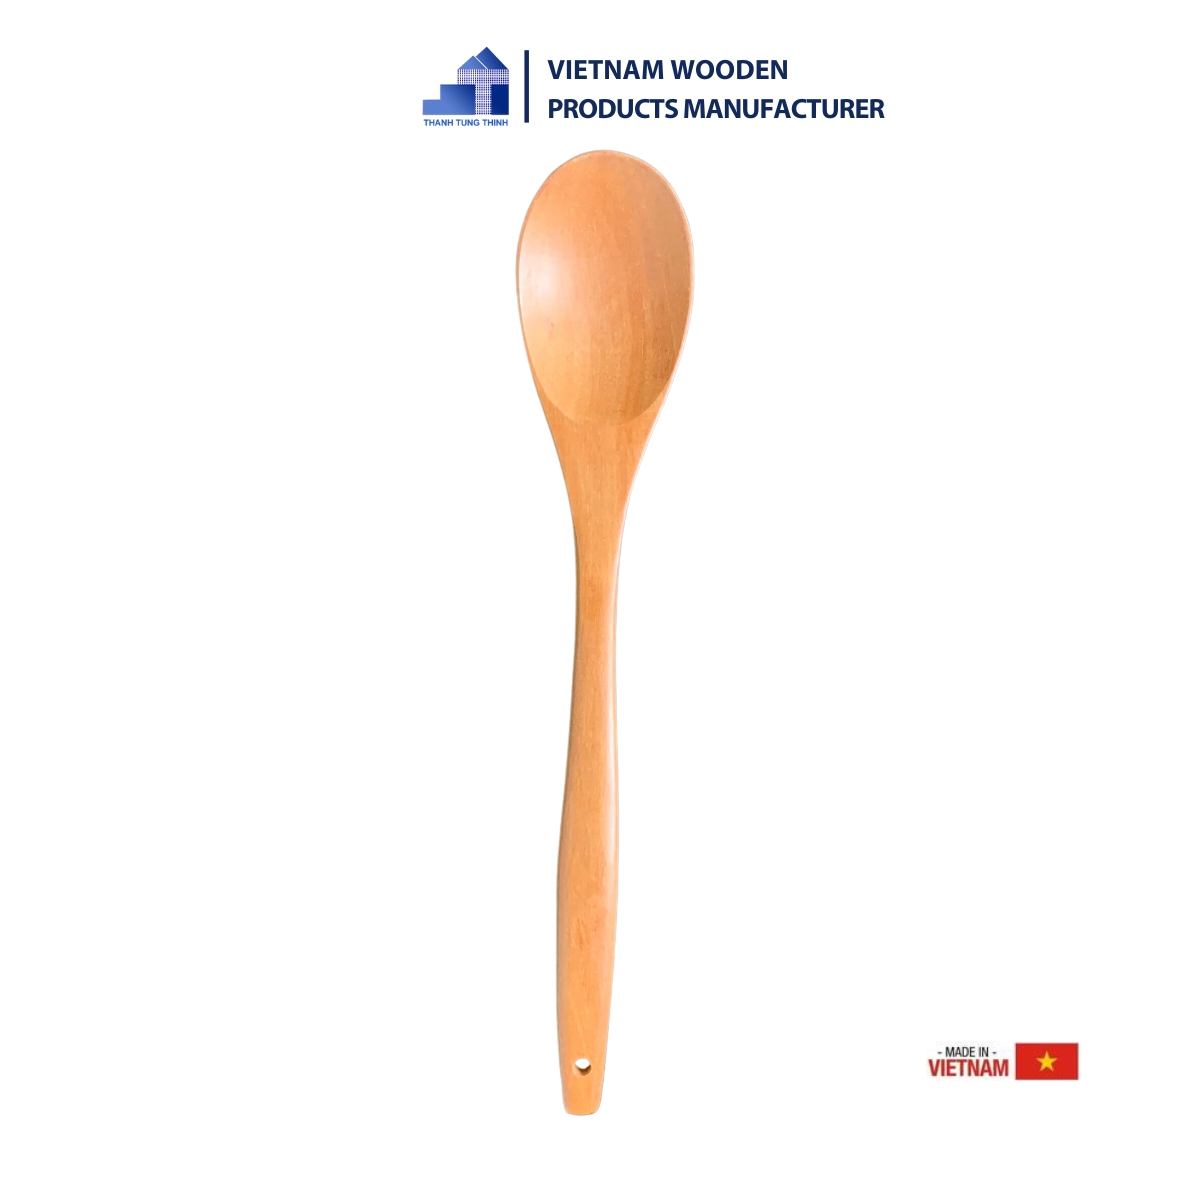 The high-quality, simple wooden spoon is made by a wood manufacturer